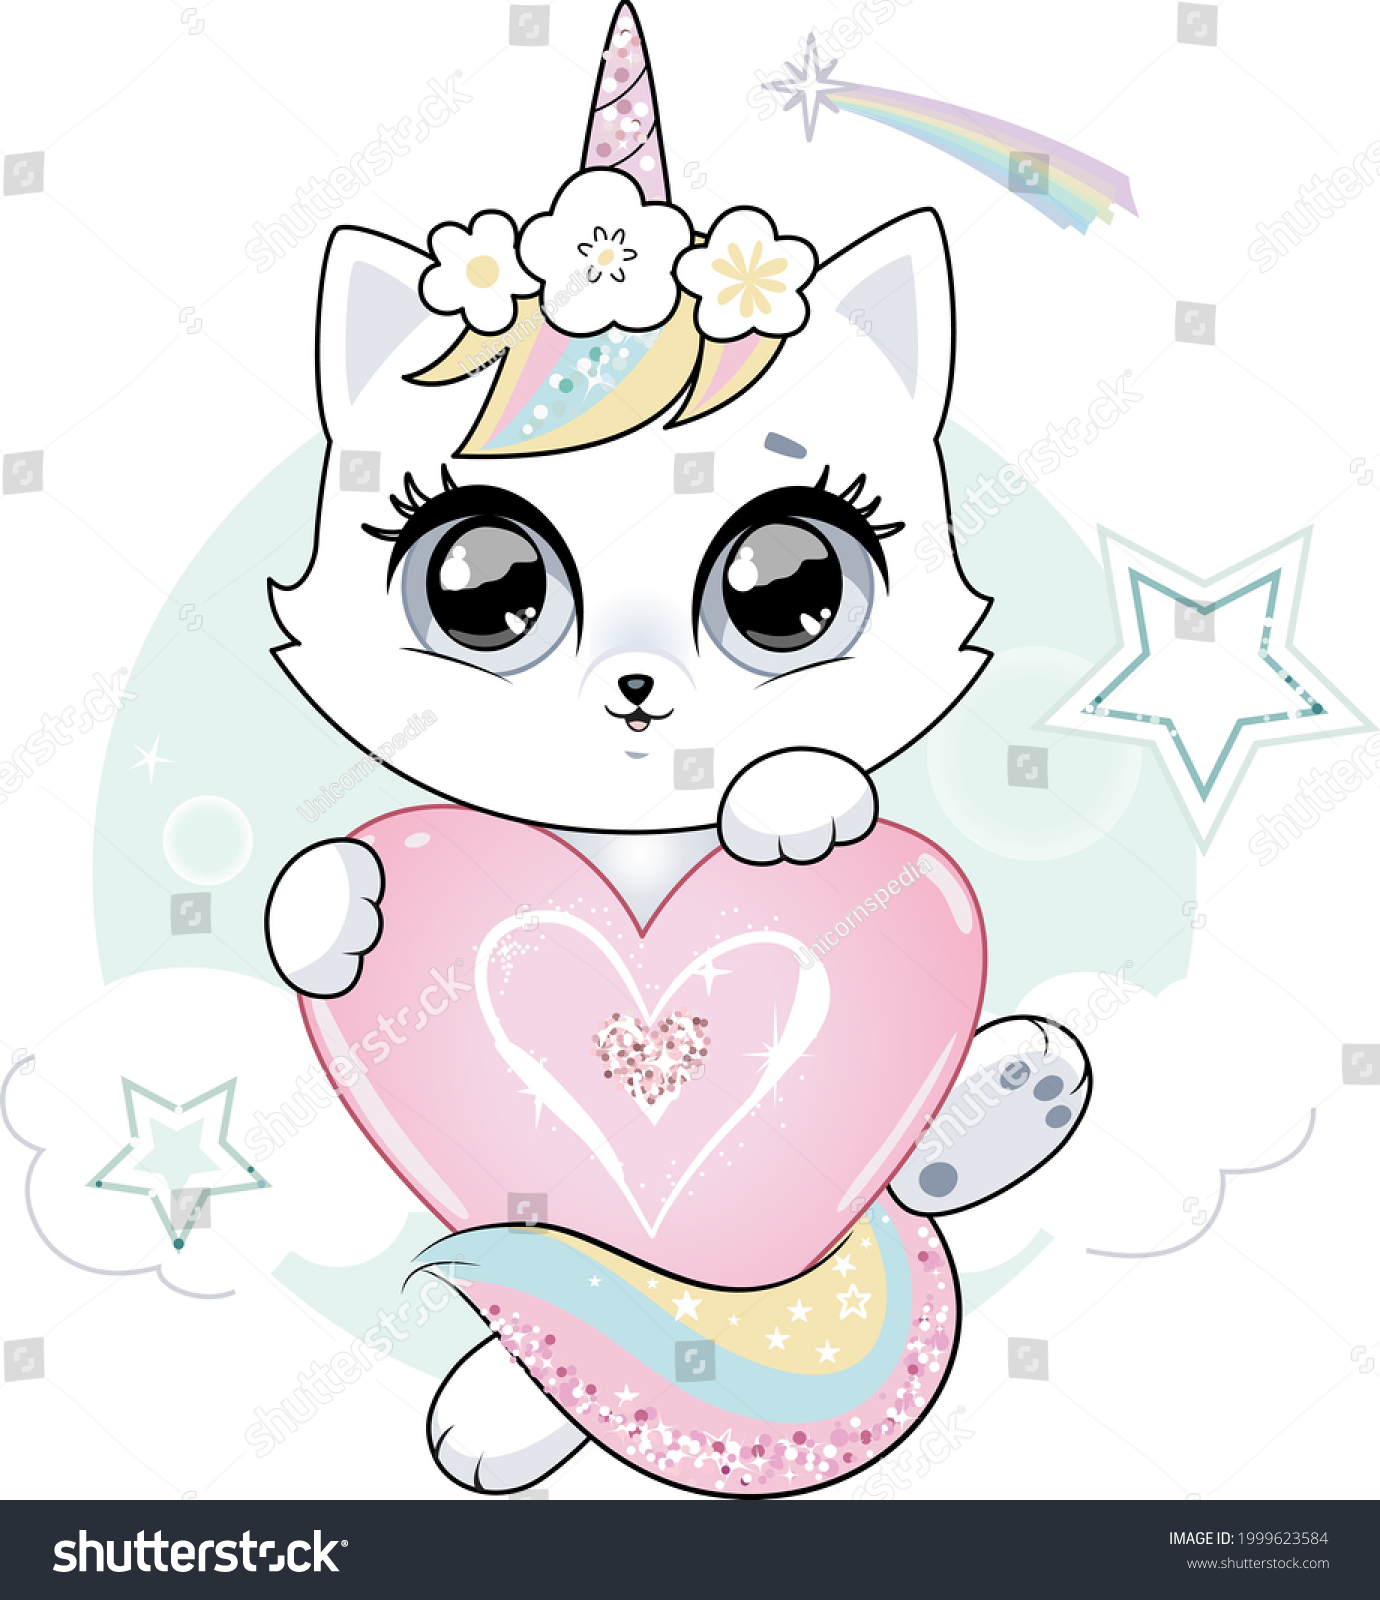 SVG of Cute little white cat unicorn or caticorn. Pastel soft colors. Vector. svg